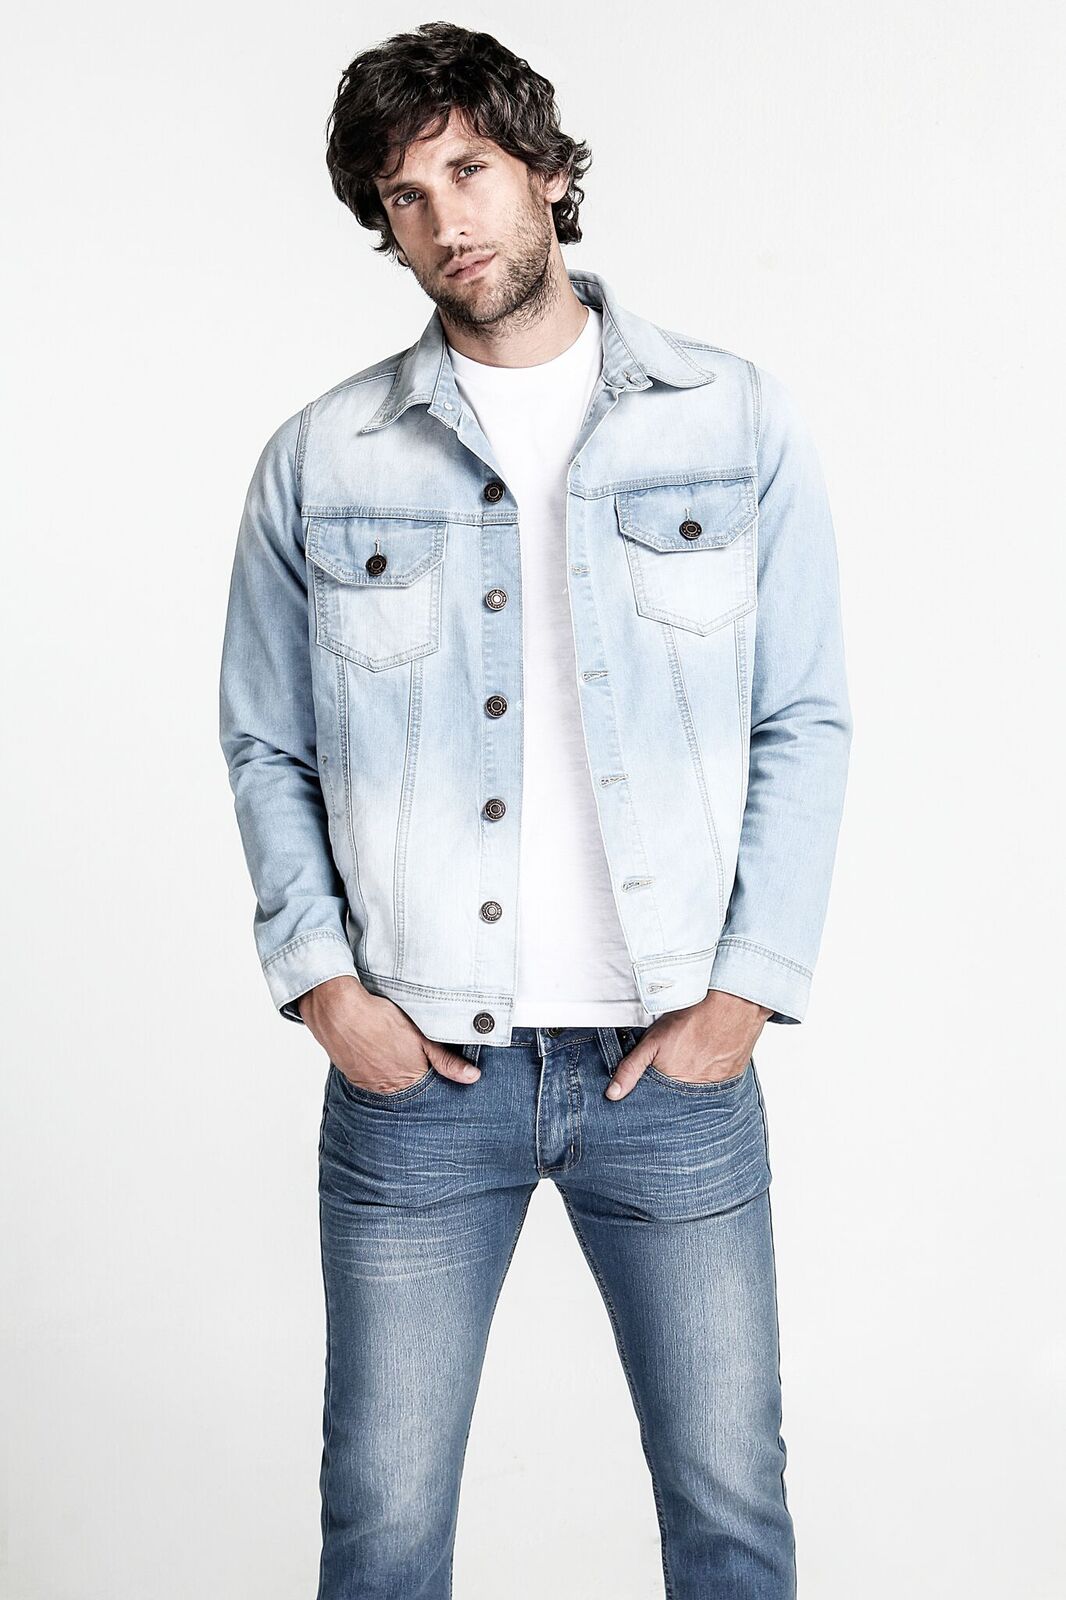 Nico Bolzico is the new face of SM Men’s Denim Collection